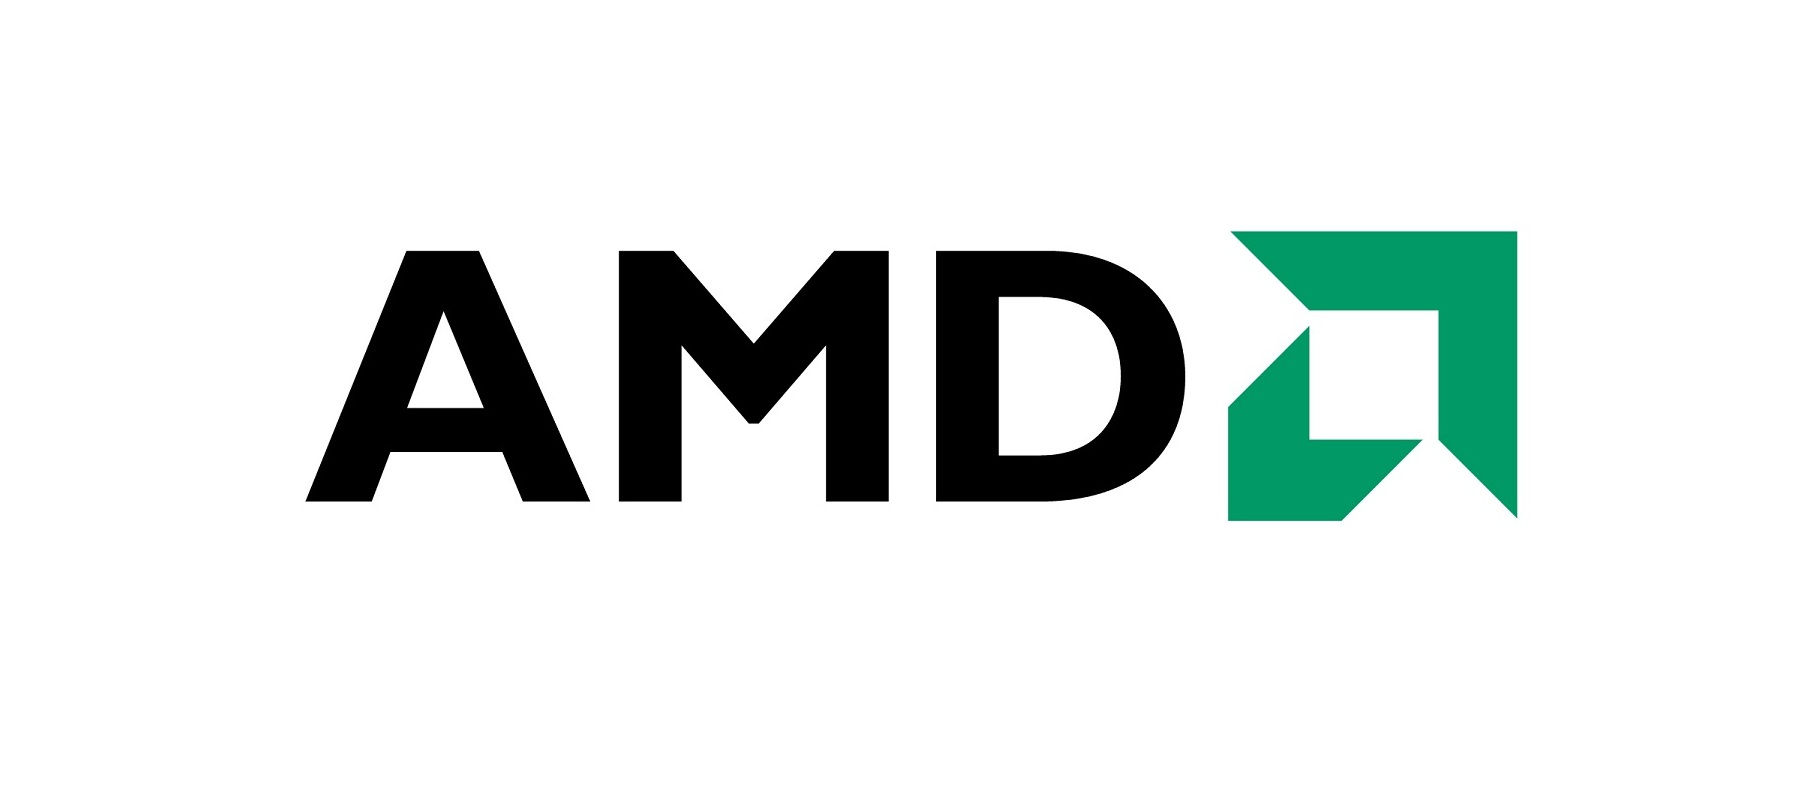 AMD Introduces New Low-Power AMD Embedded G-Series APU and Extends Platform Availability Through 2017